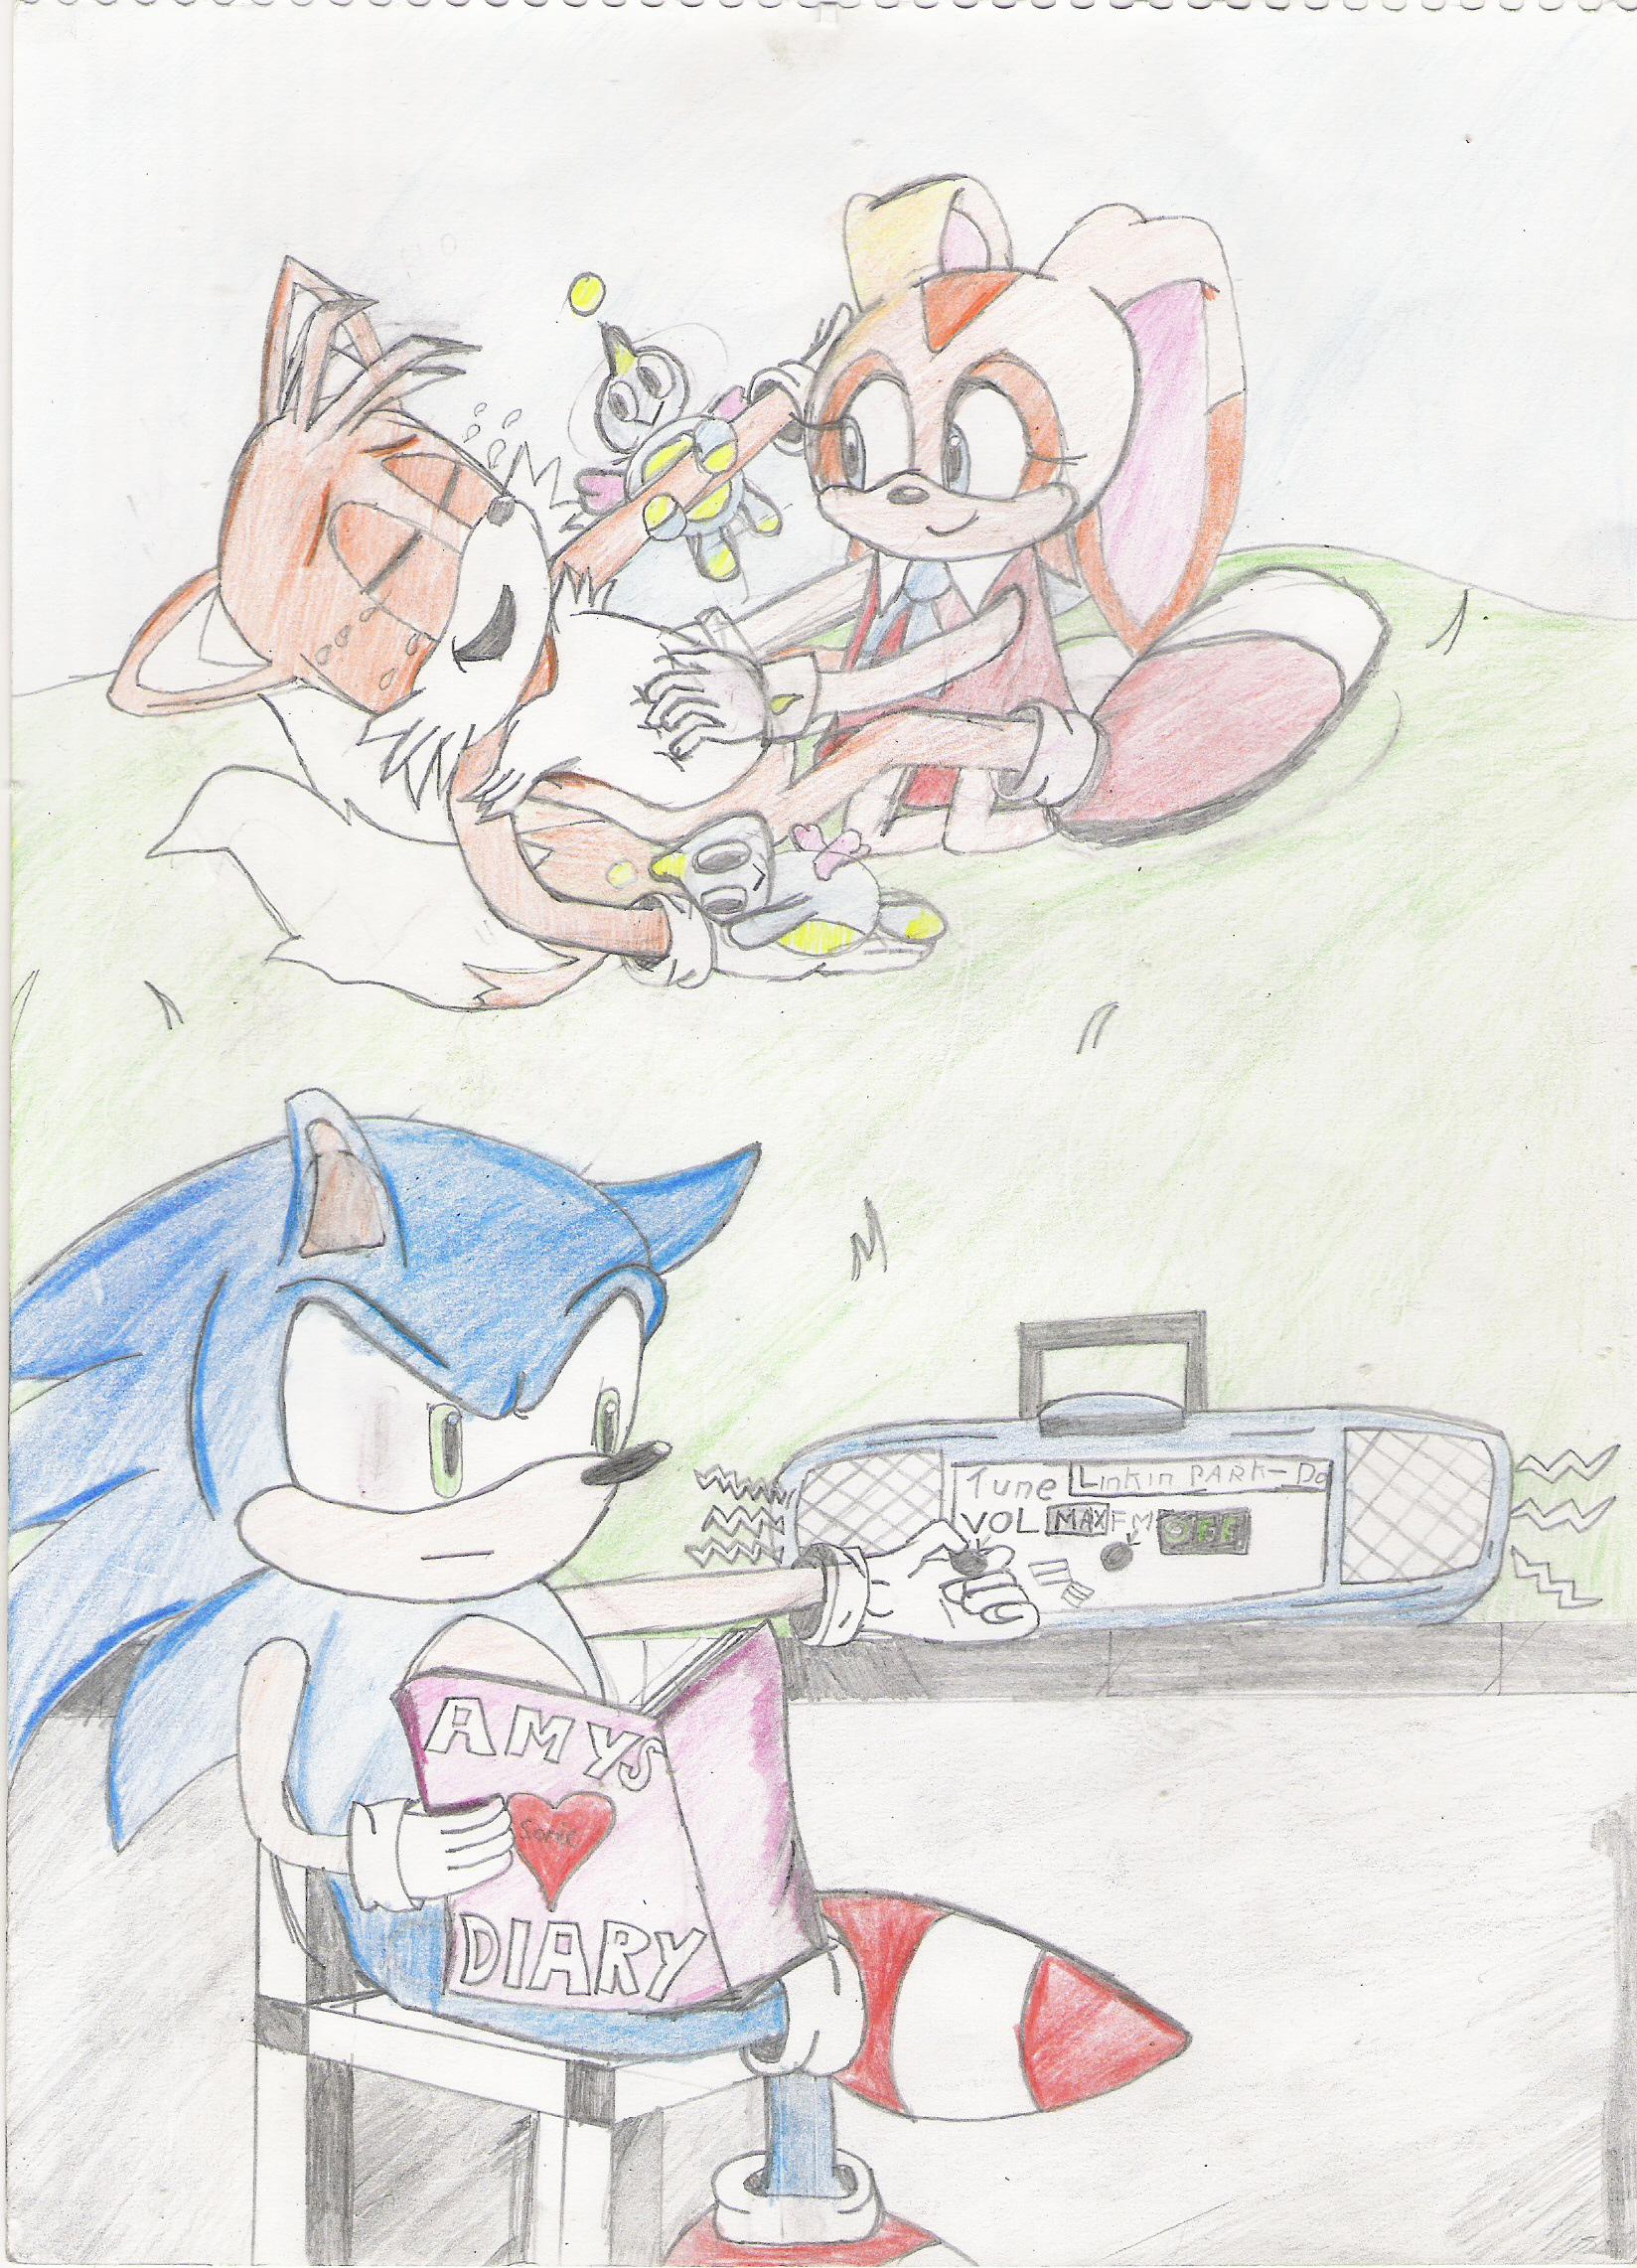 SONIC HELP! IT TICKLES!!!!!! by Luck1